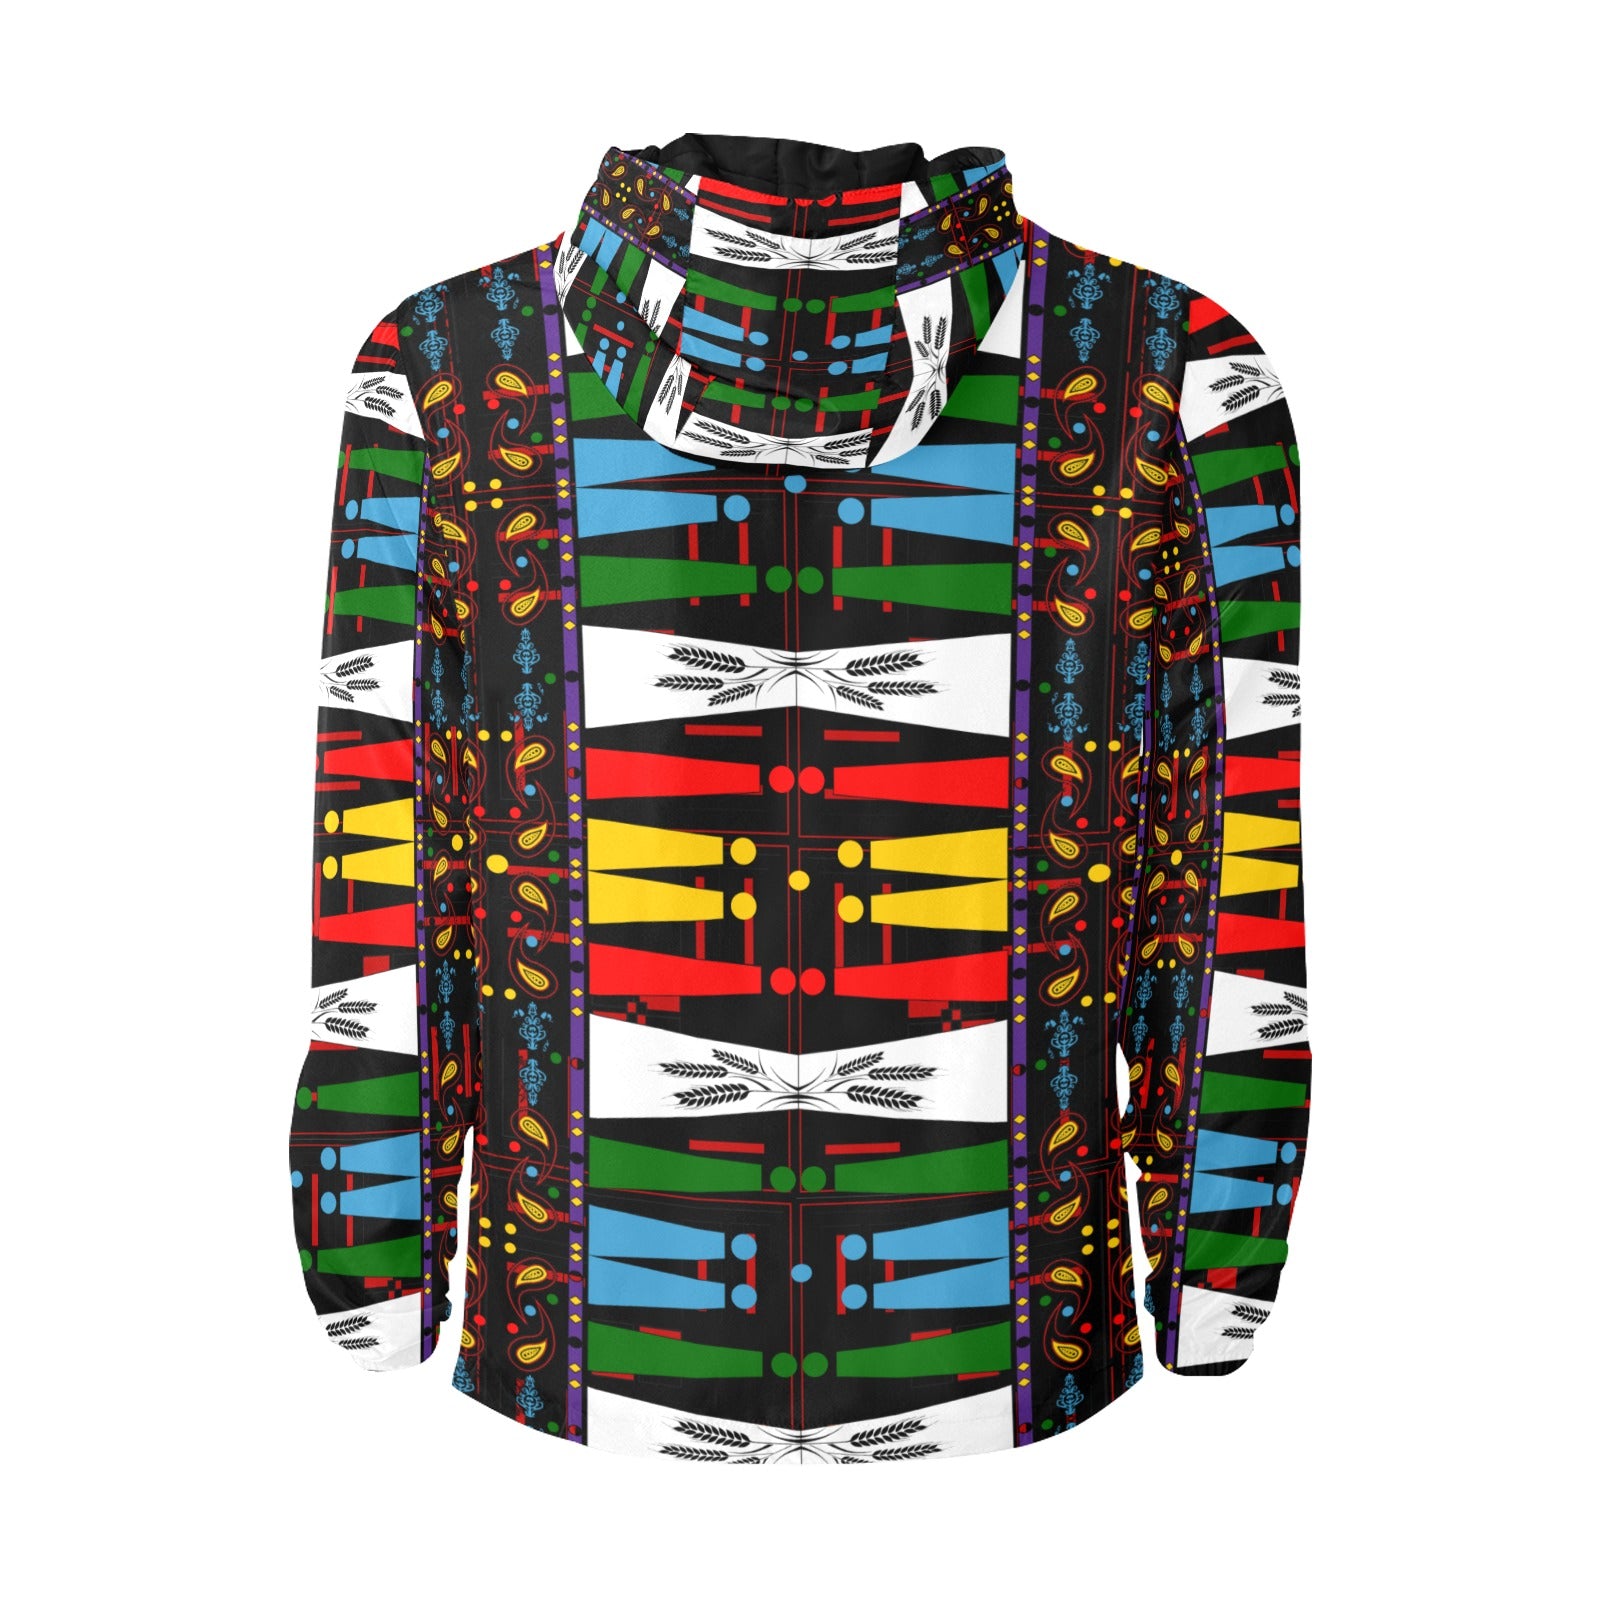 "Native Print" Men's Windbreaker Quilted lining. By ChuArts